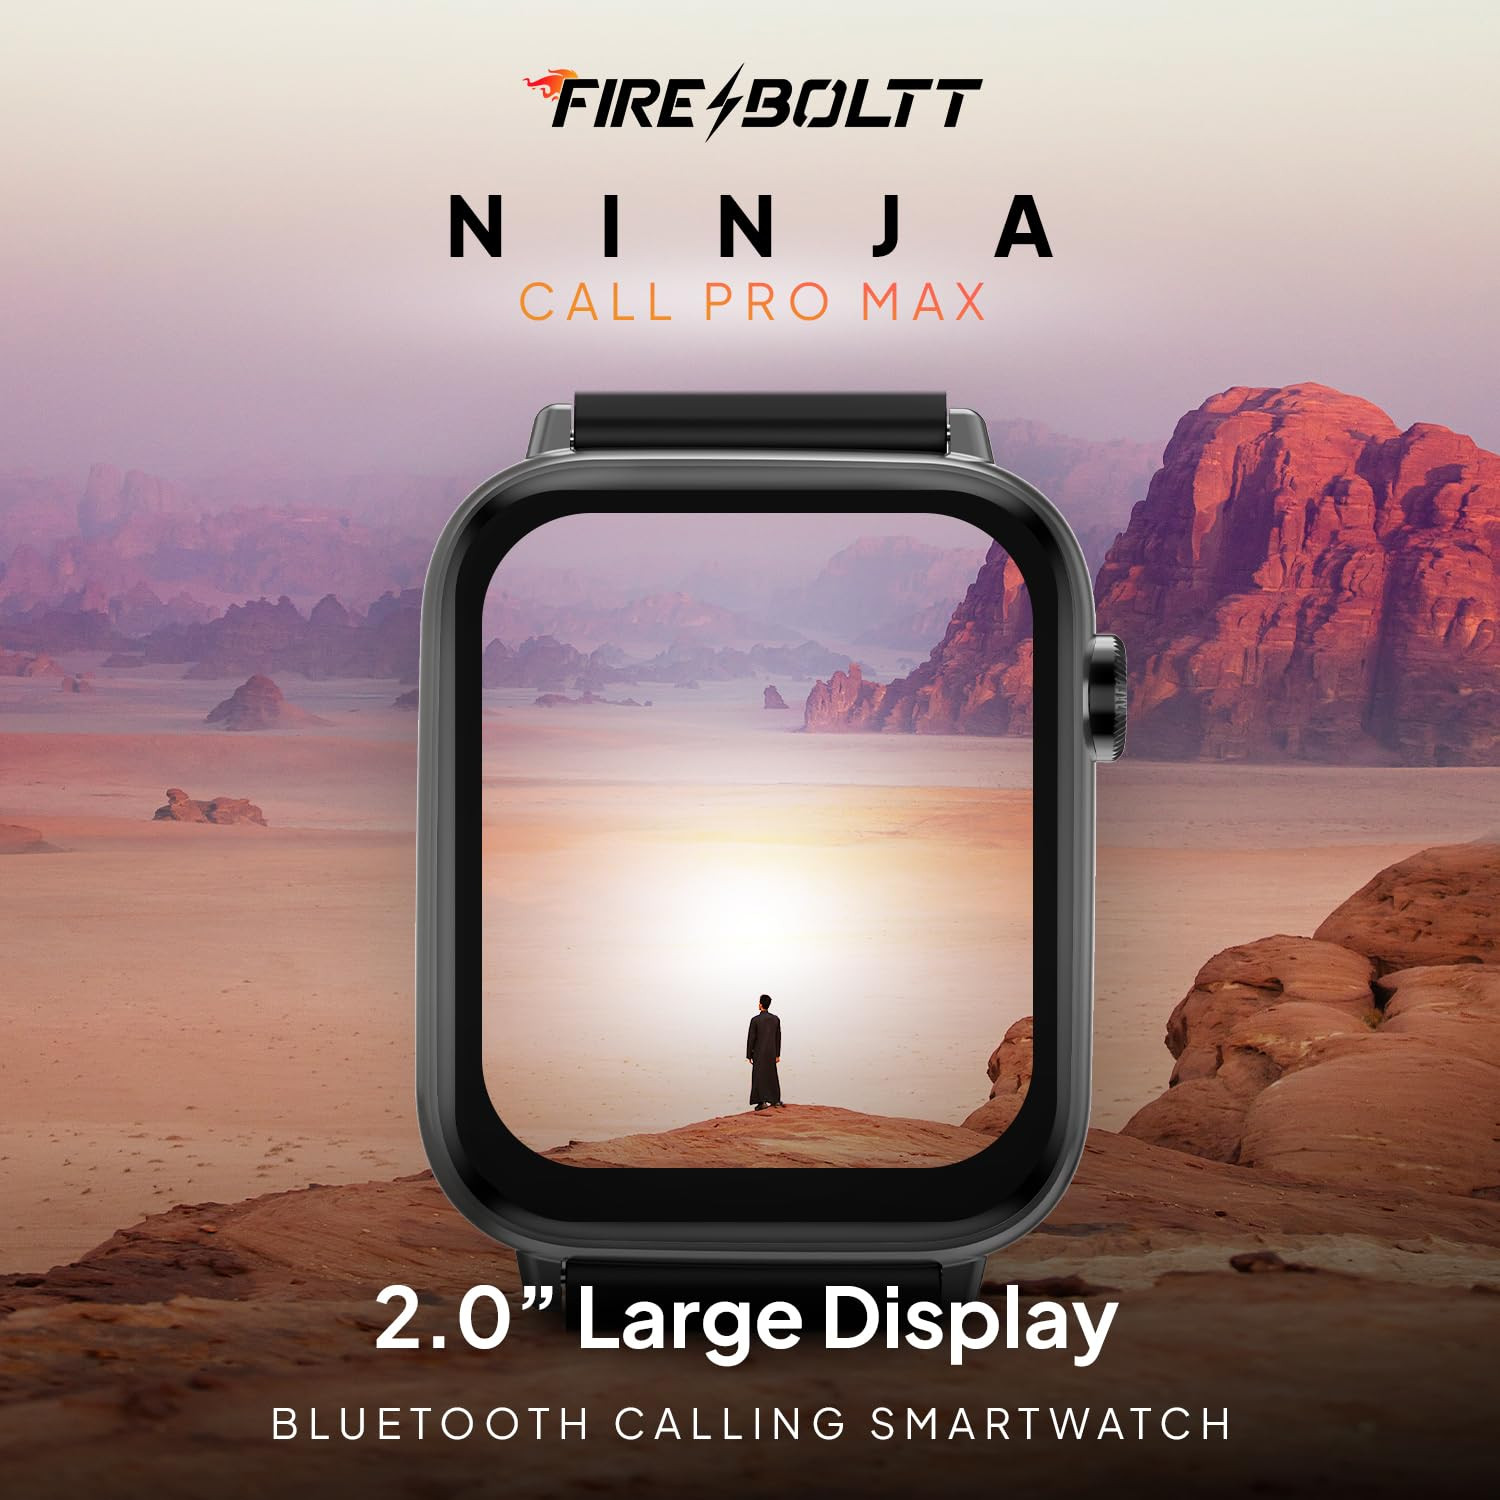 Fire-Boltt Ninja Call Pro Max 201 Display Smart Watch Bluetooth Calling 120 Sports Modes Health Suite Voice Assistance